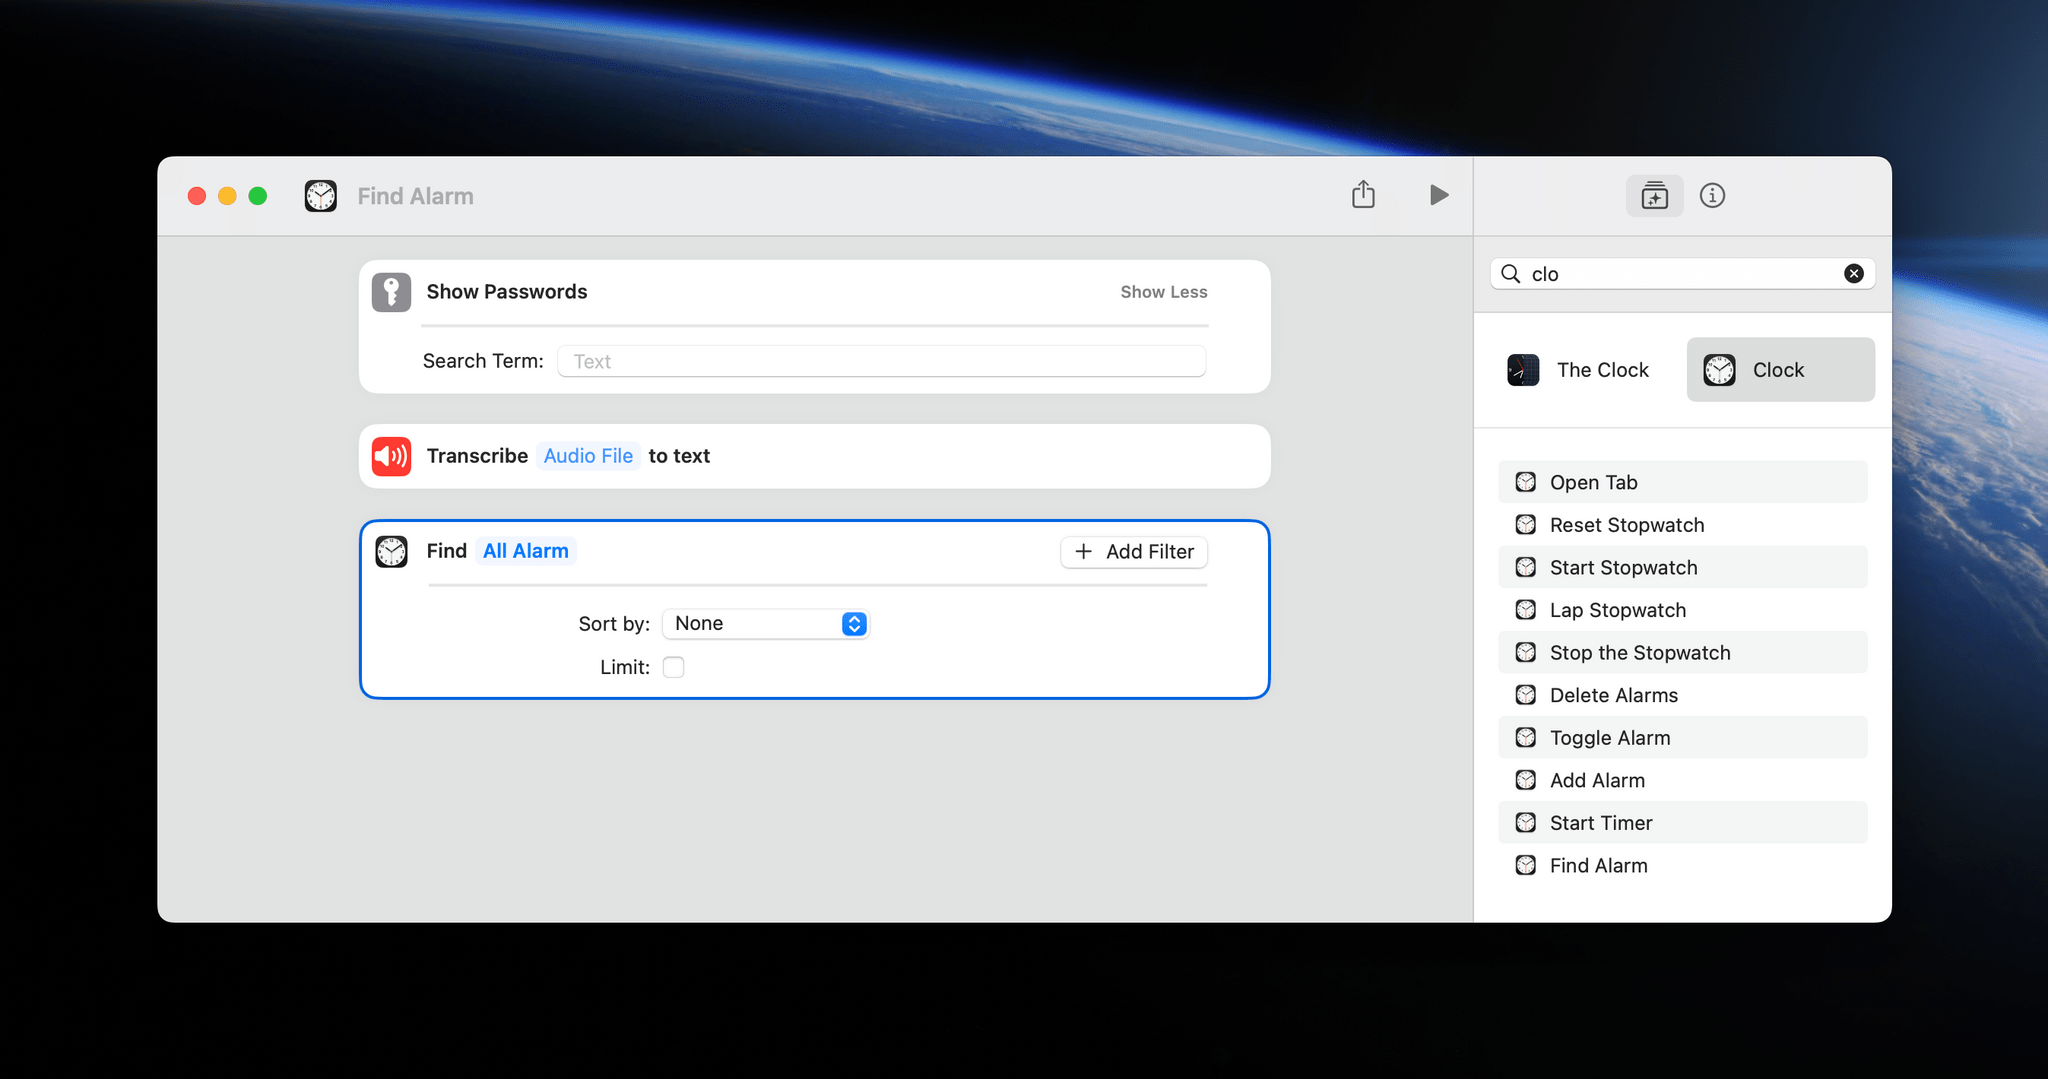 A few of the Shortcuts for Mac actions that could come in handy.